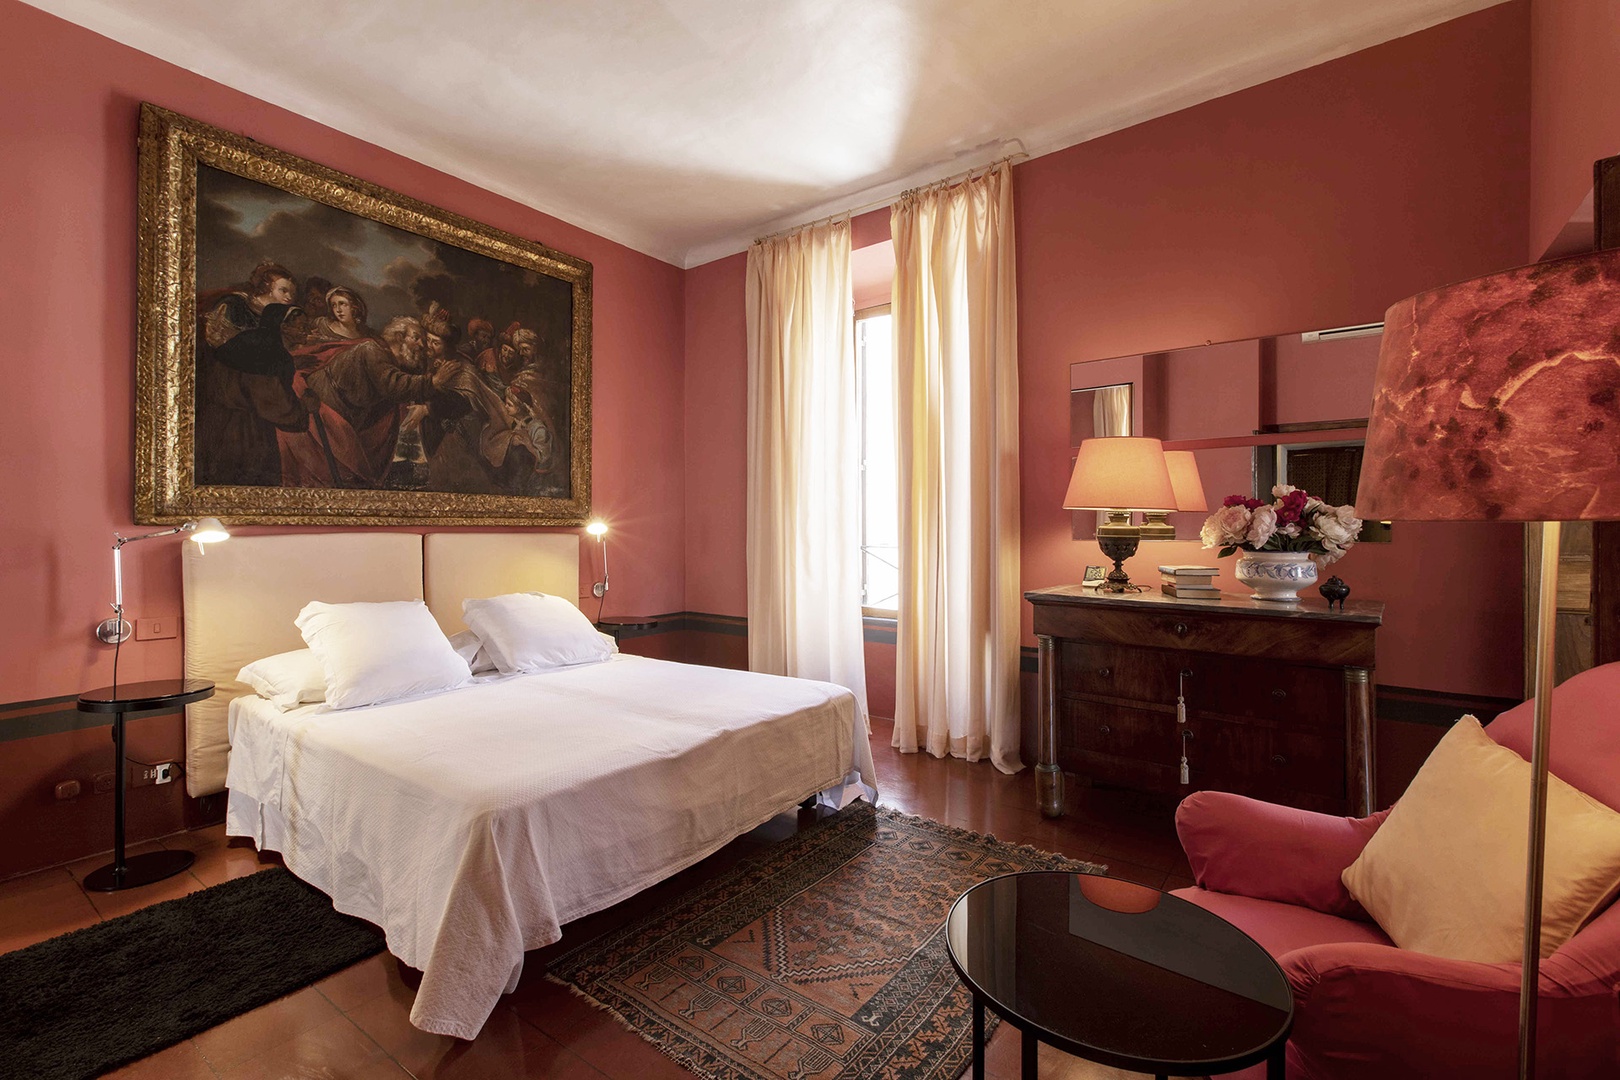 Handsome Pompeii red walls in bedroom 2. The single beds are combinable.